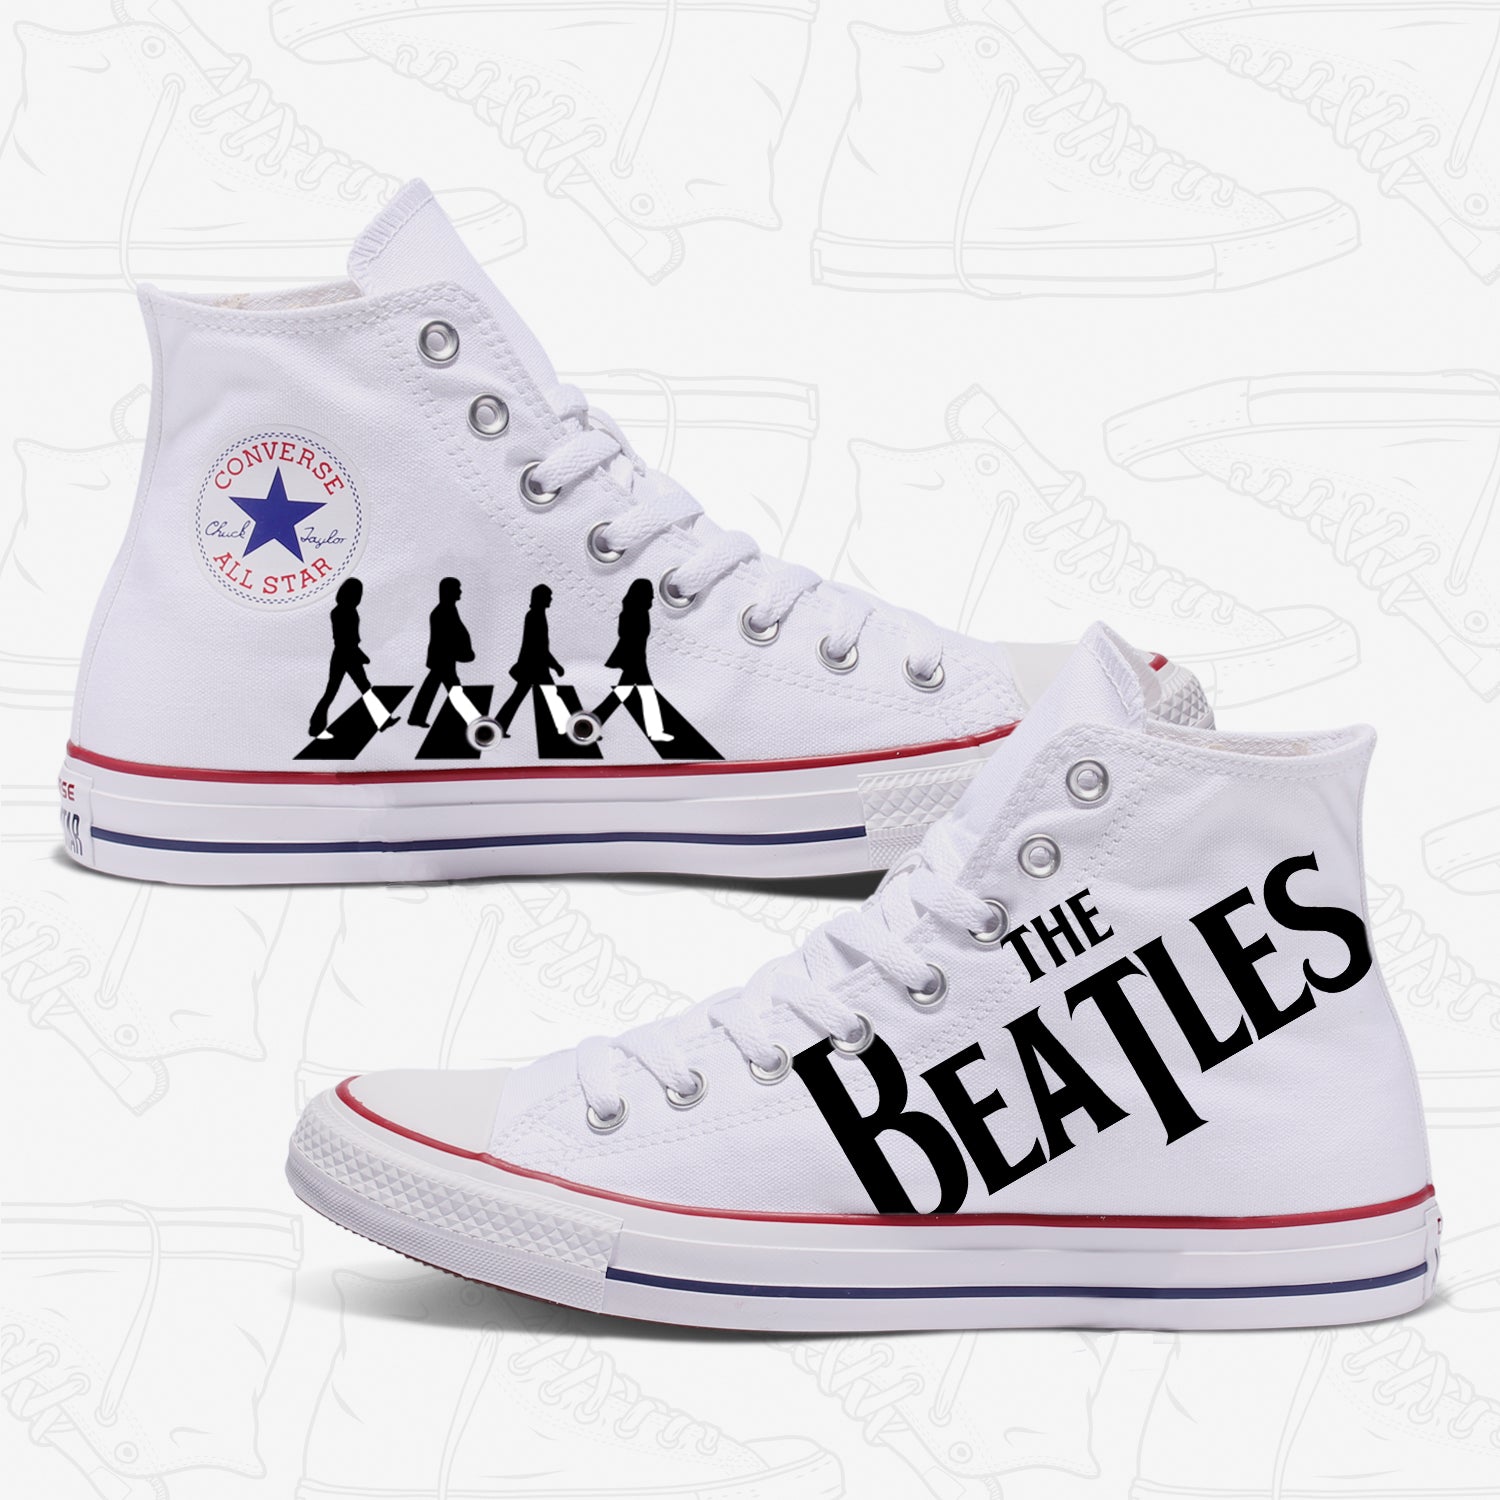 The Beatles Adult Converse Shoes